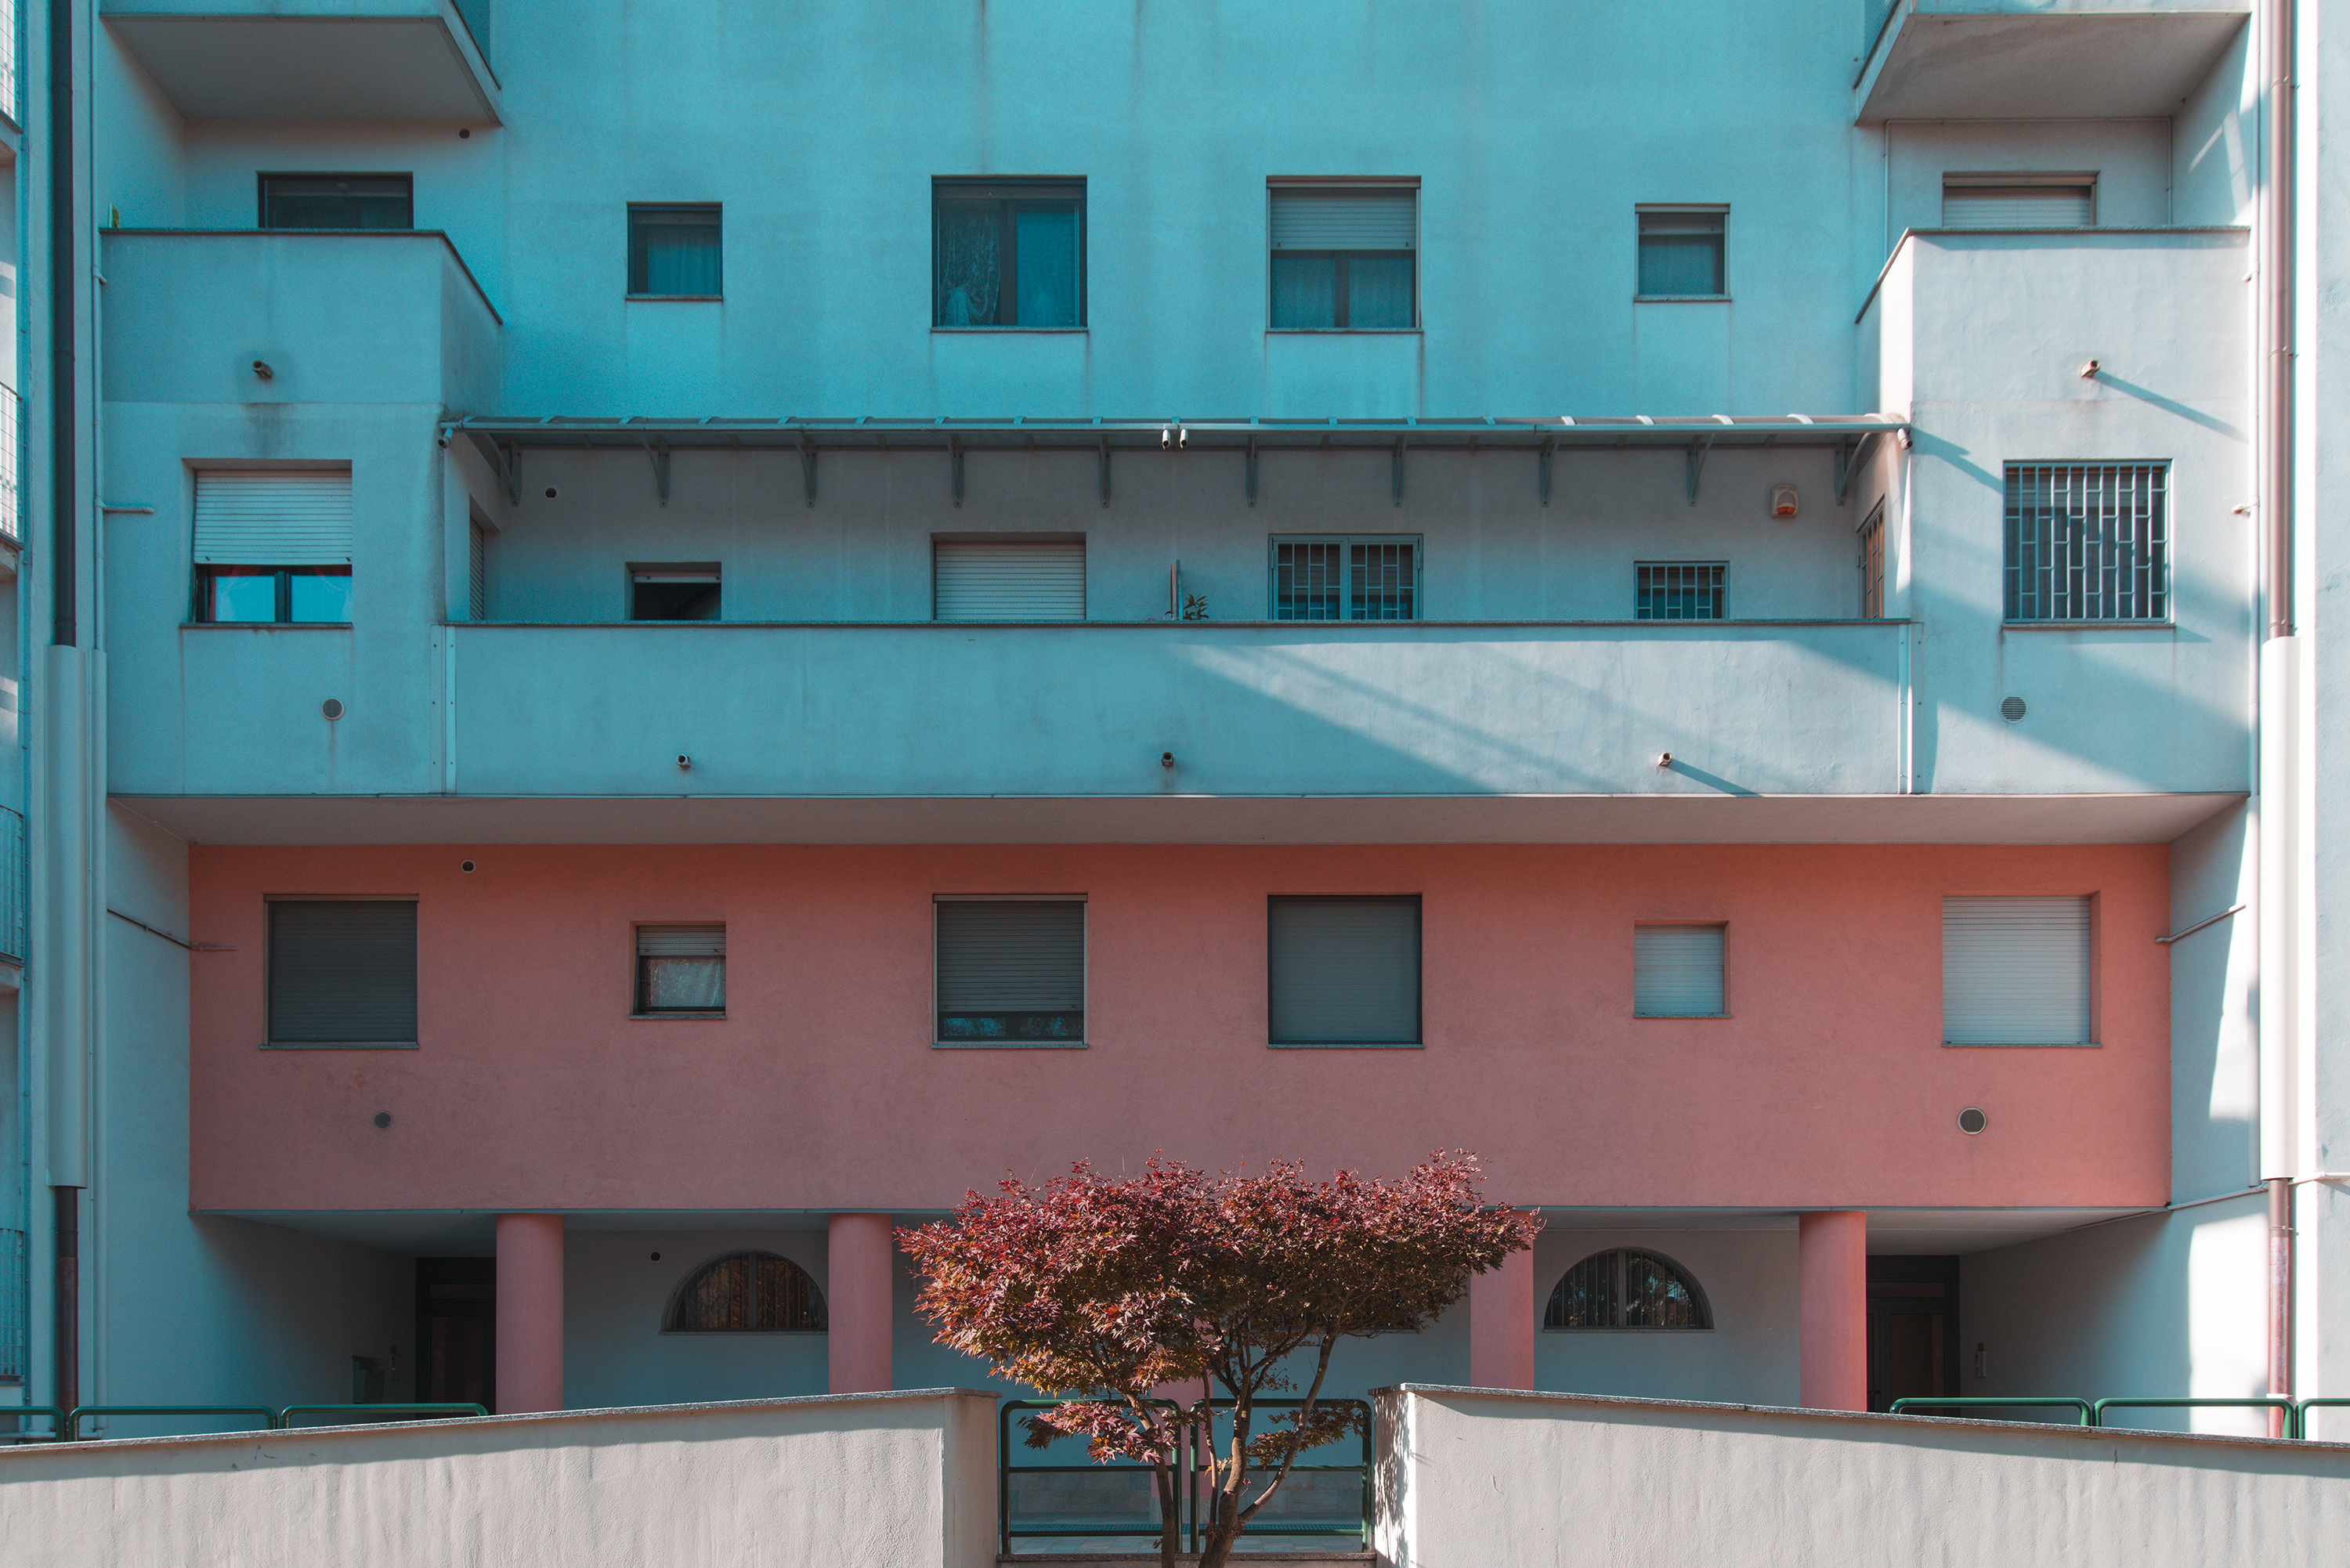 Colourful and Geometric Architecture Pictures